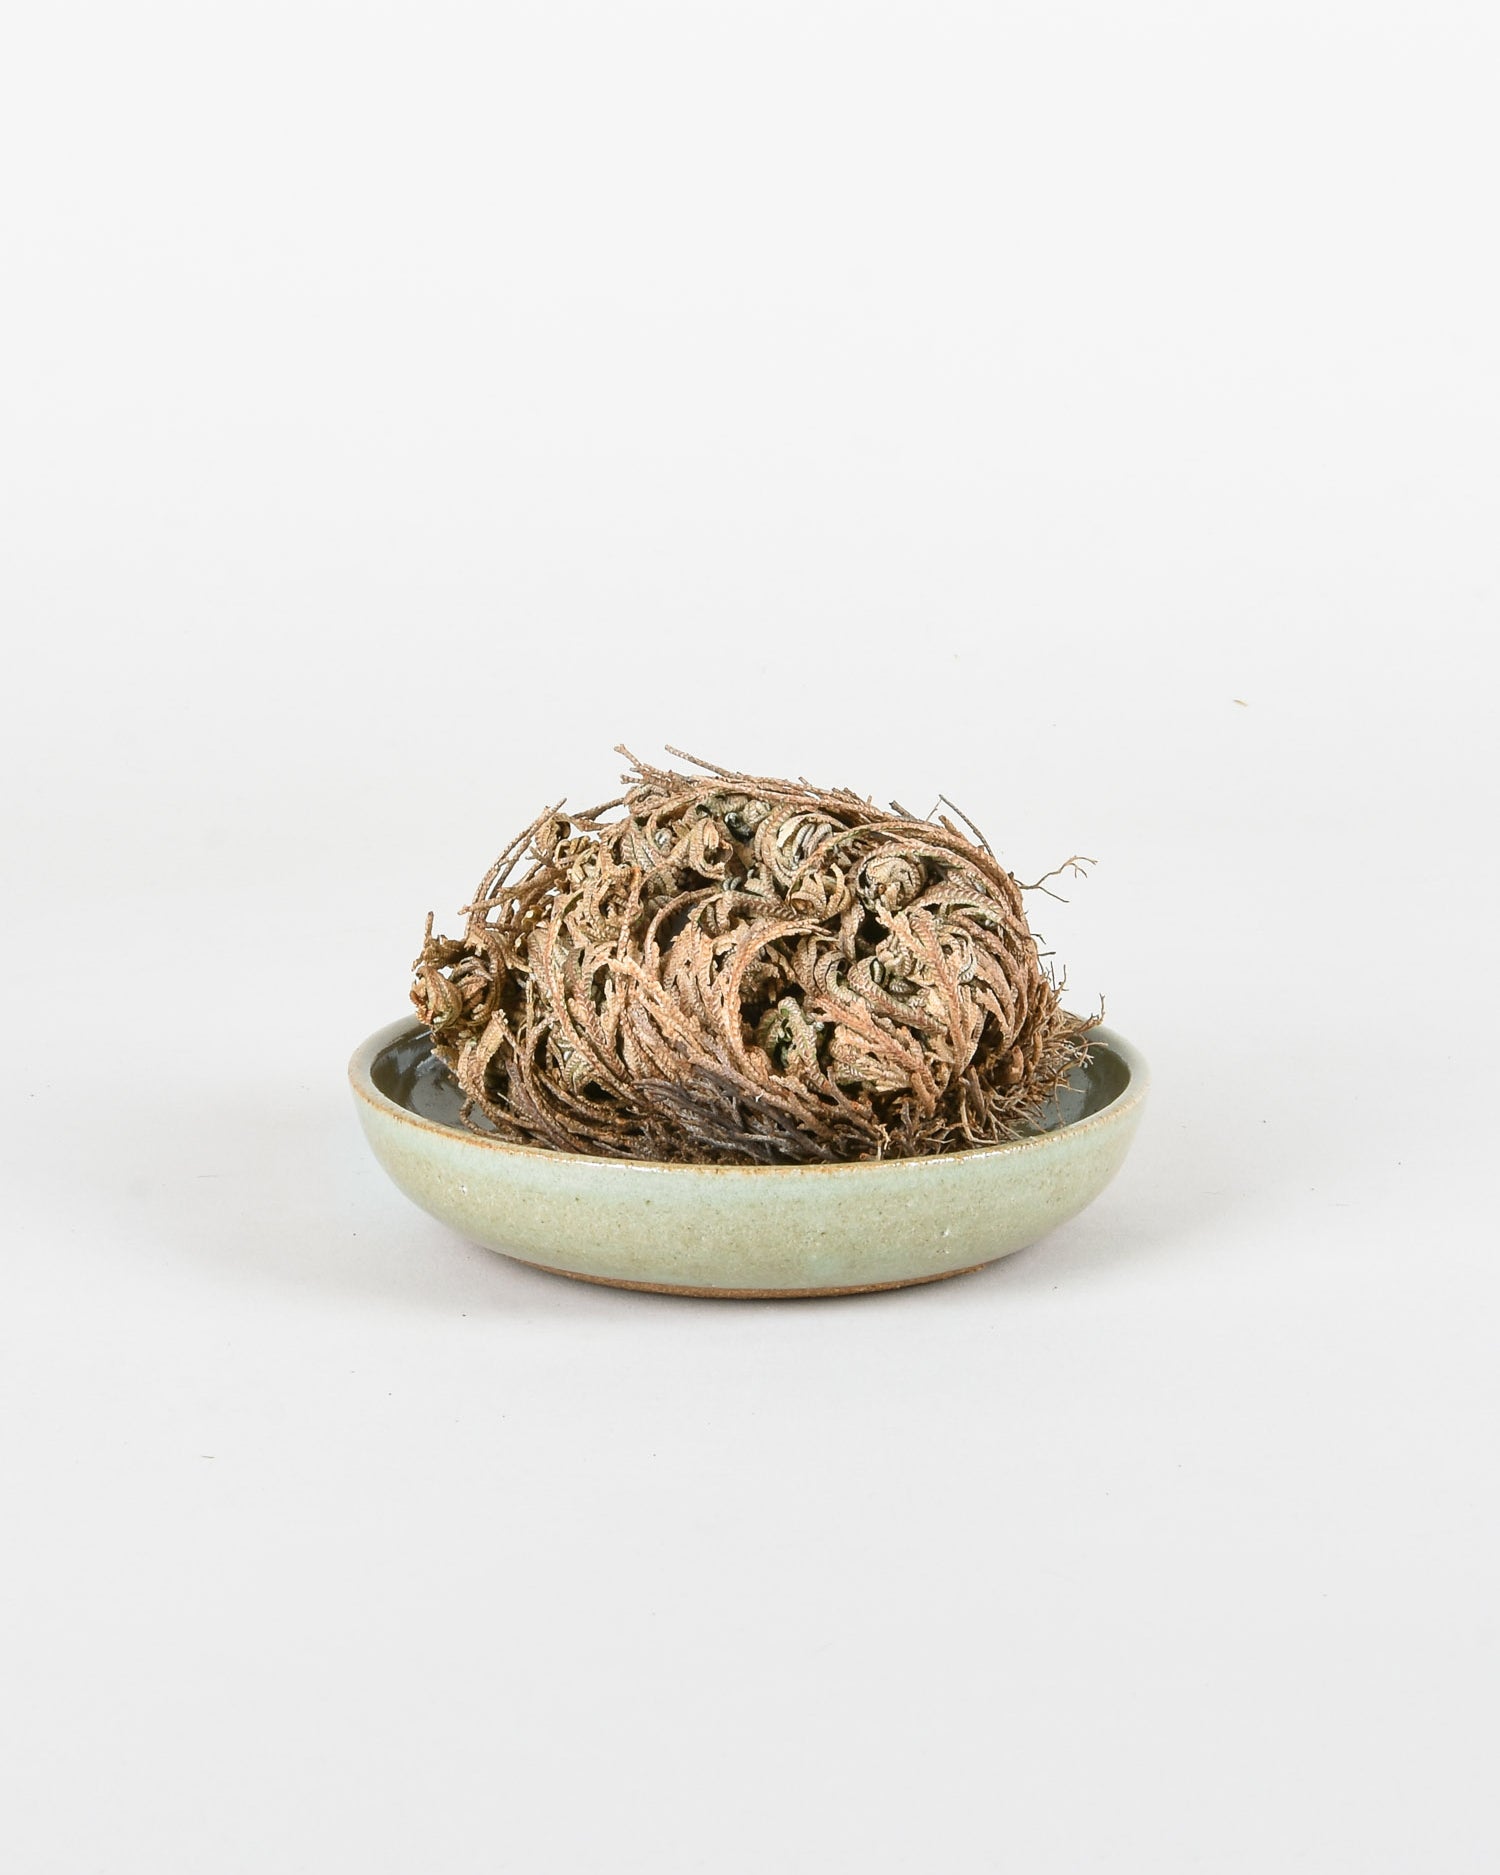 Resurrection Plant closed up sitting in shallow dish